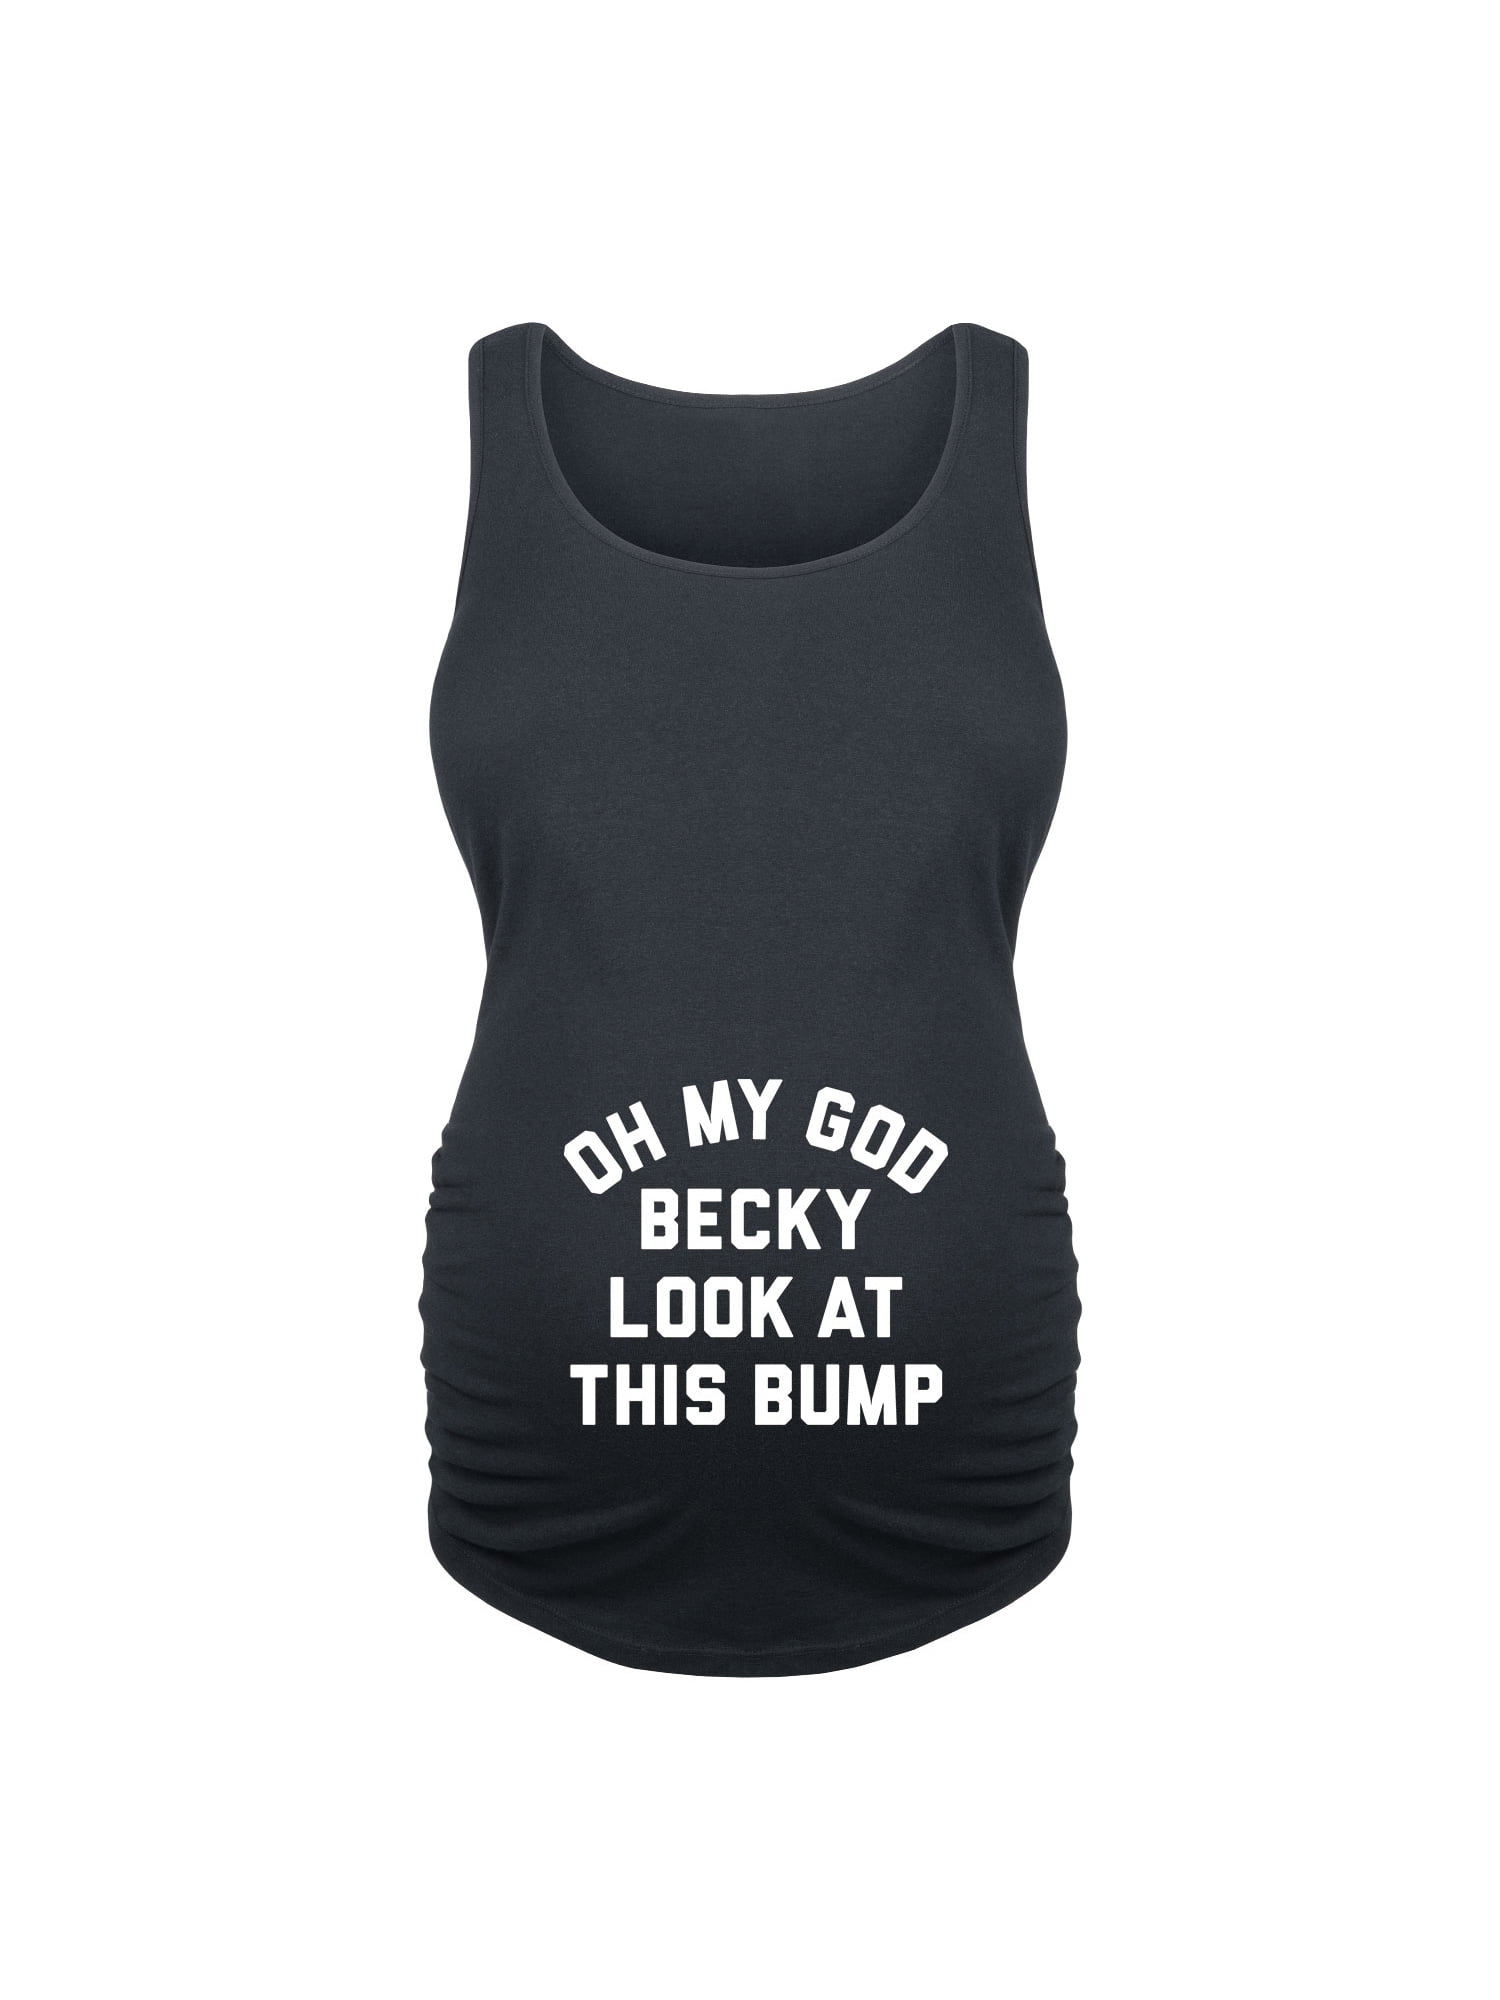 Oh My God Becky Look at This Bump Ladies Maternity Tank 